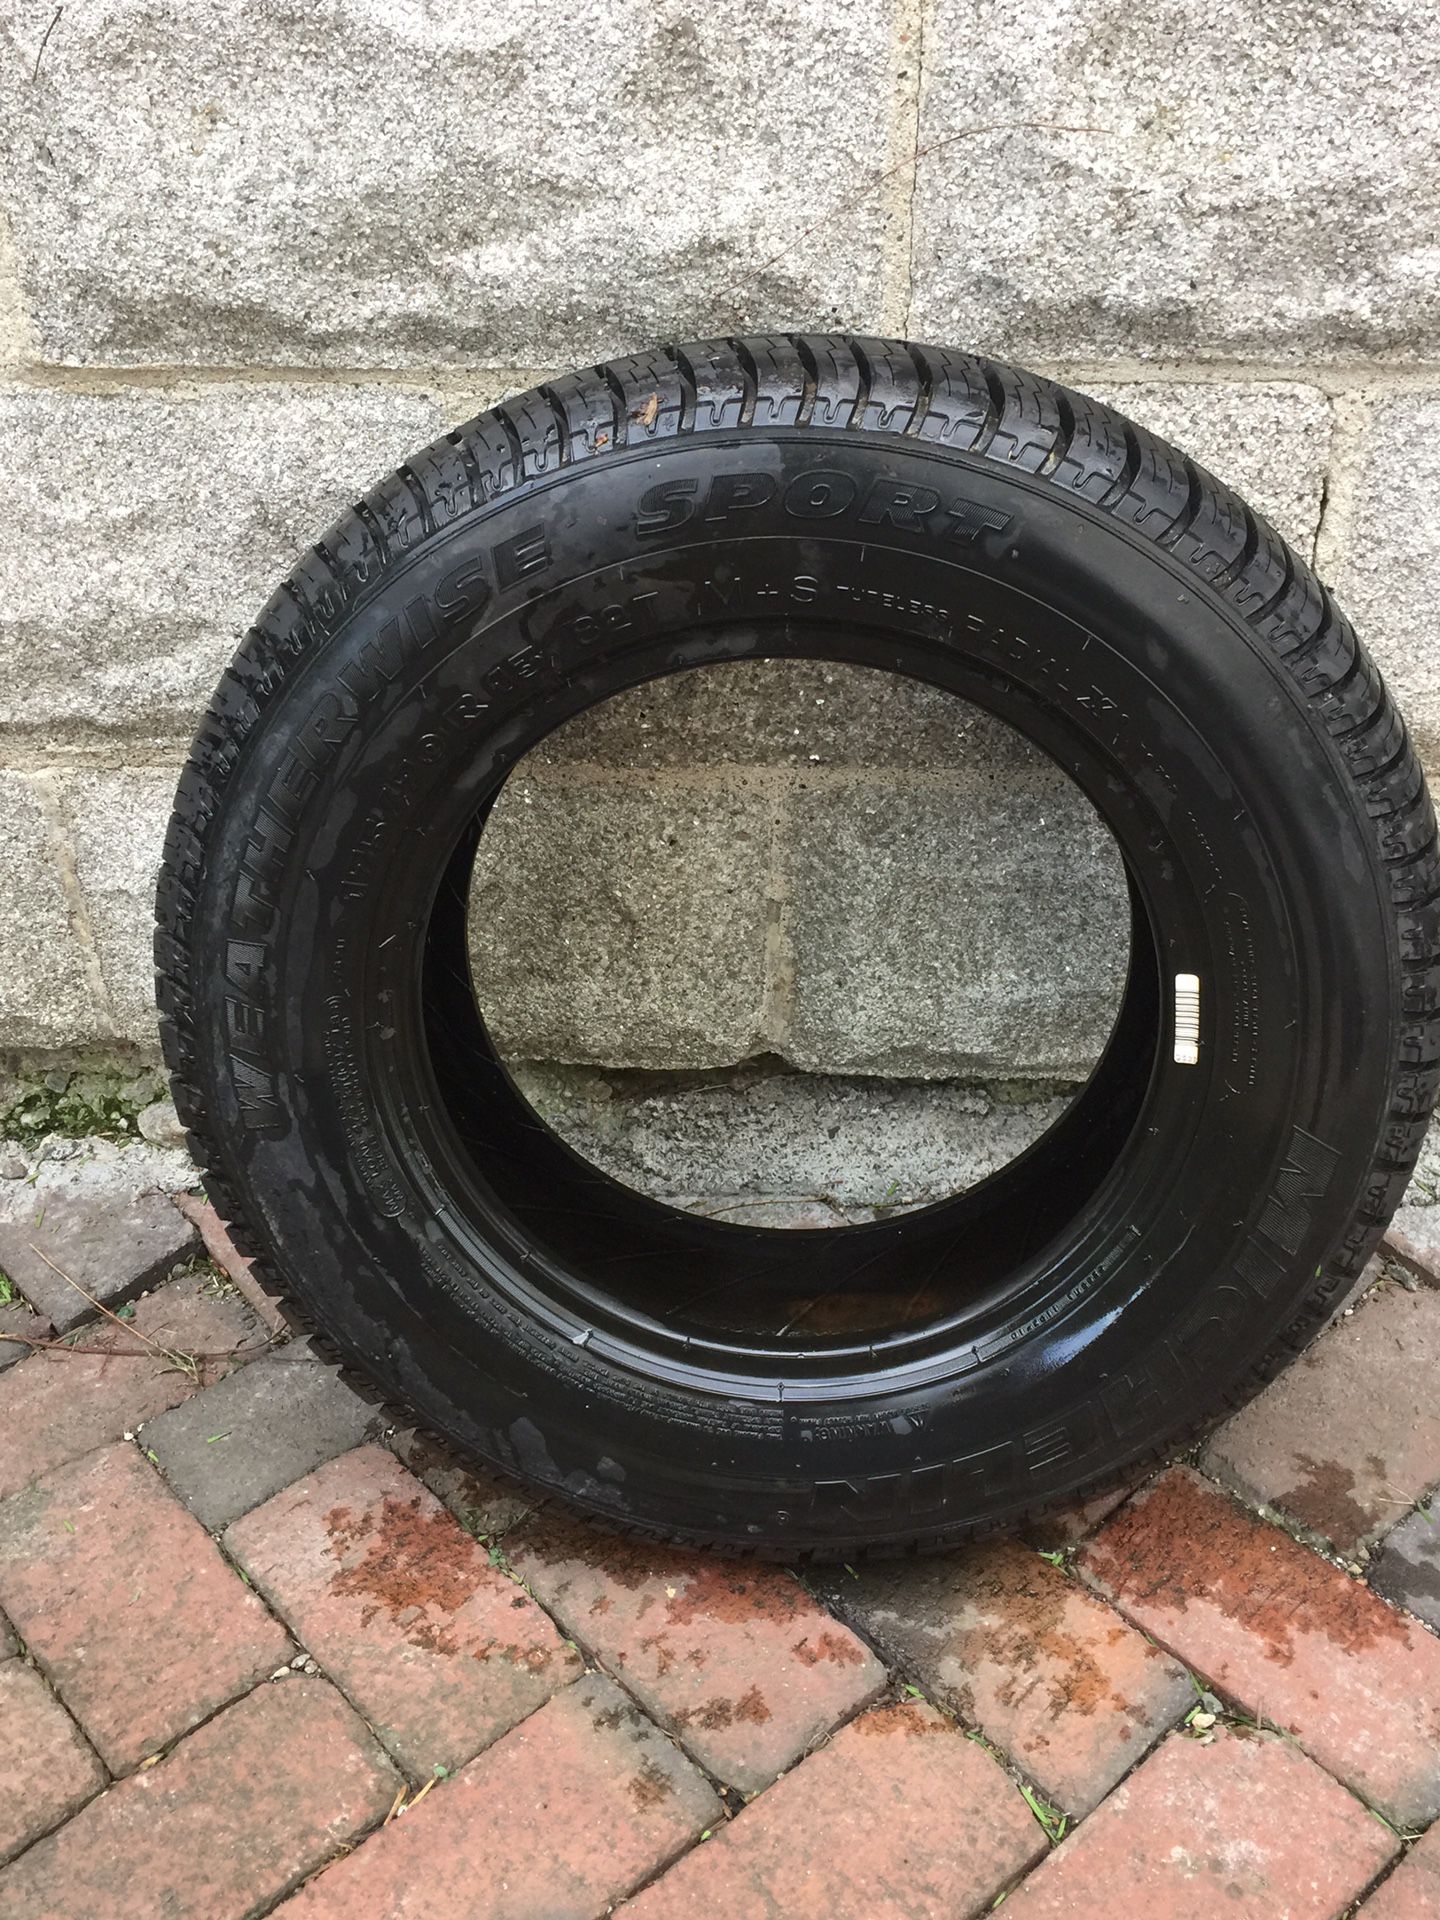 All weather Michelin weatherwise Sport tires 175/170r13